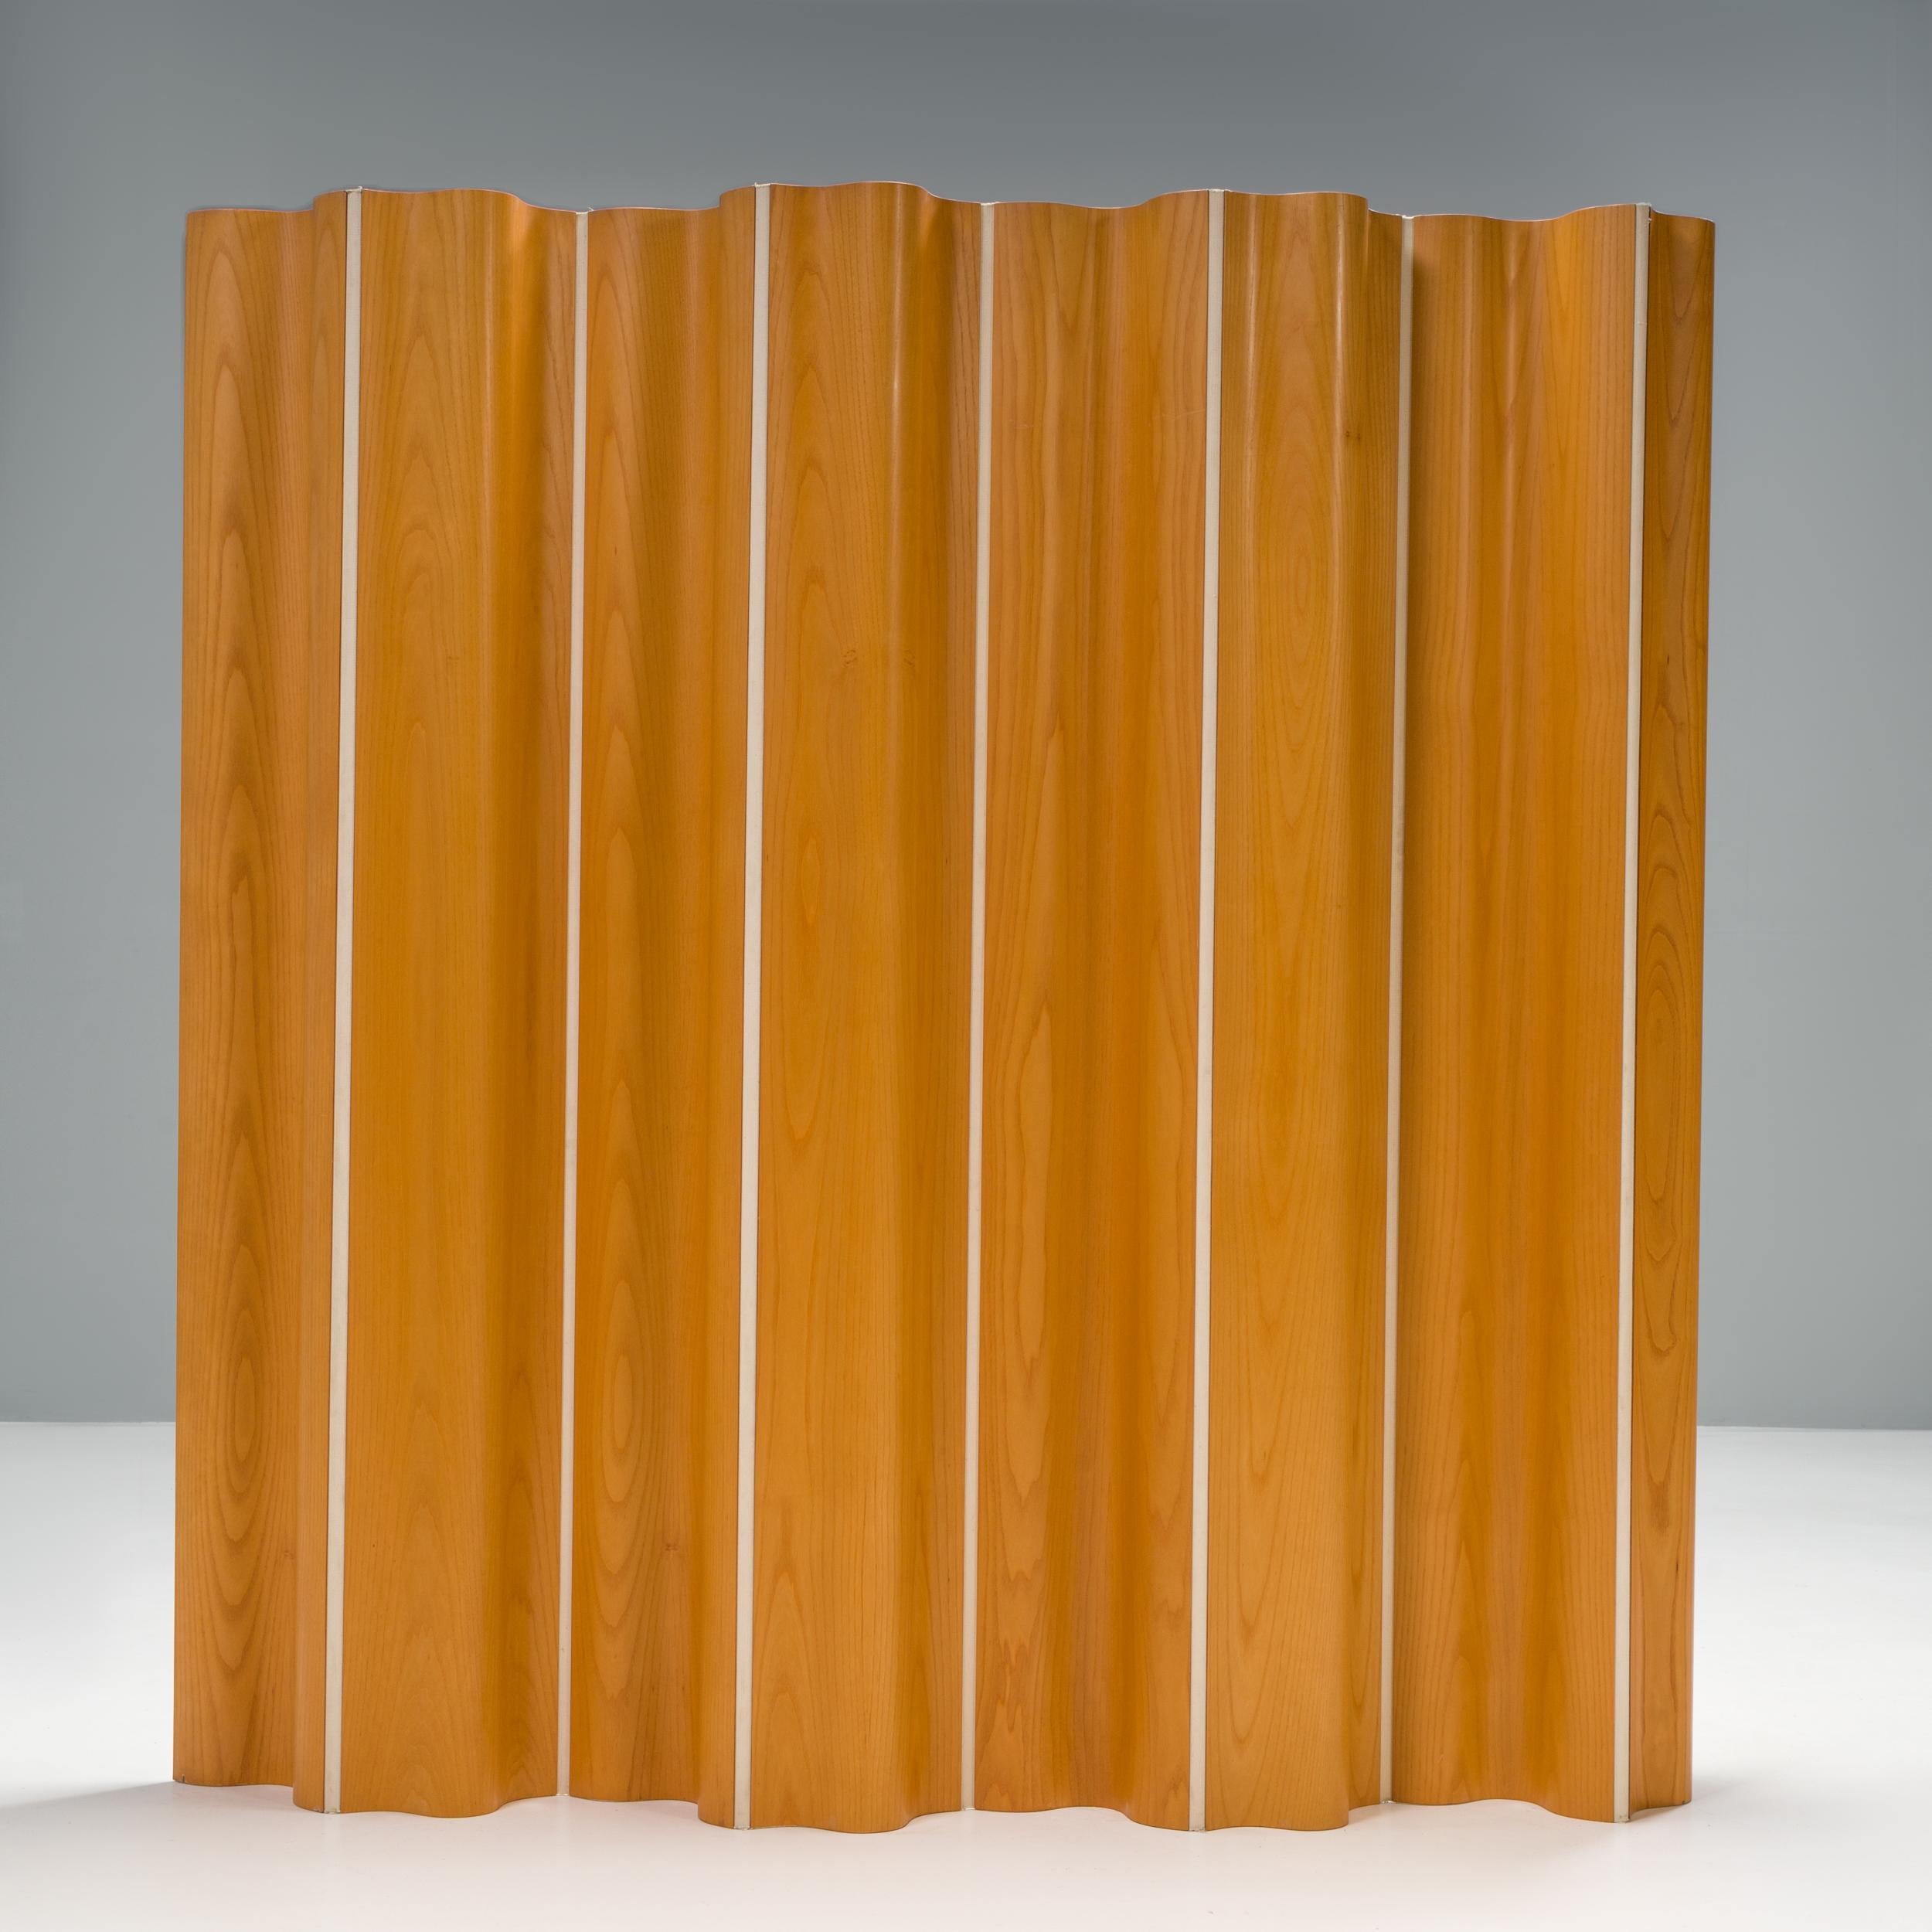 Originally designed by Charles and Ray Eames in 1946, the FSW Folding Screen is an iconic piece of mid-century design.

Released as part of the plywood home furniture collection, the screen is constructed from a number of moulded plywood panels